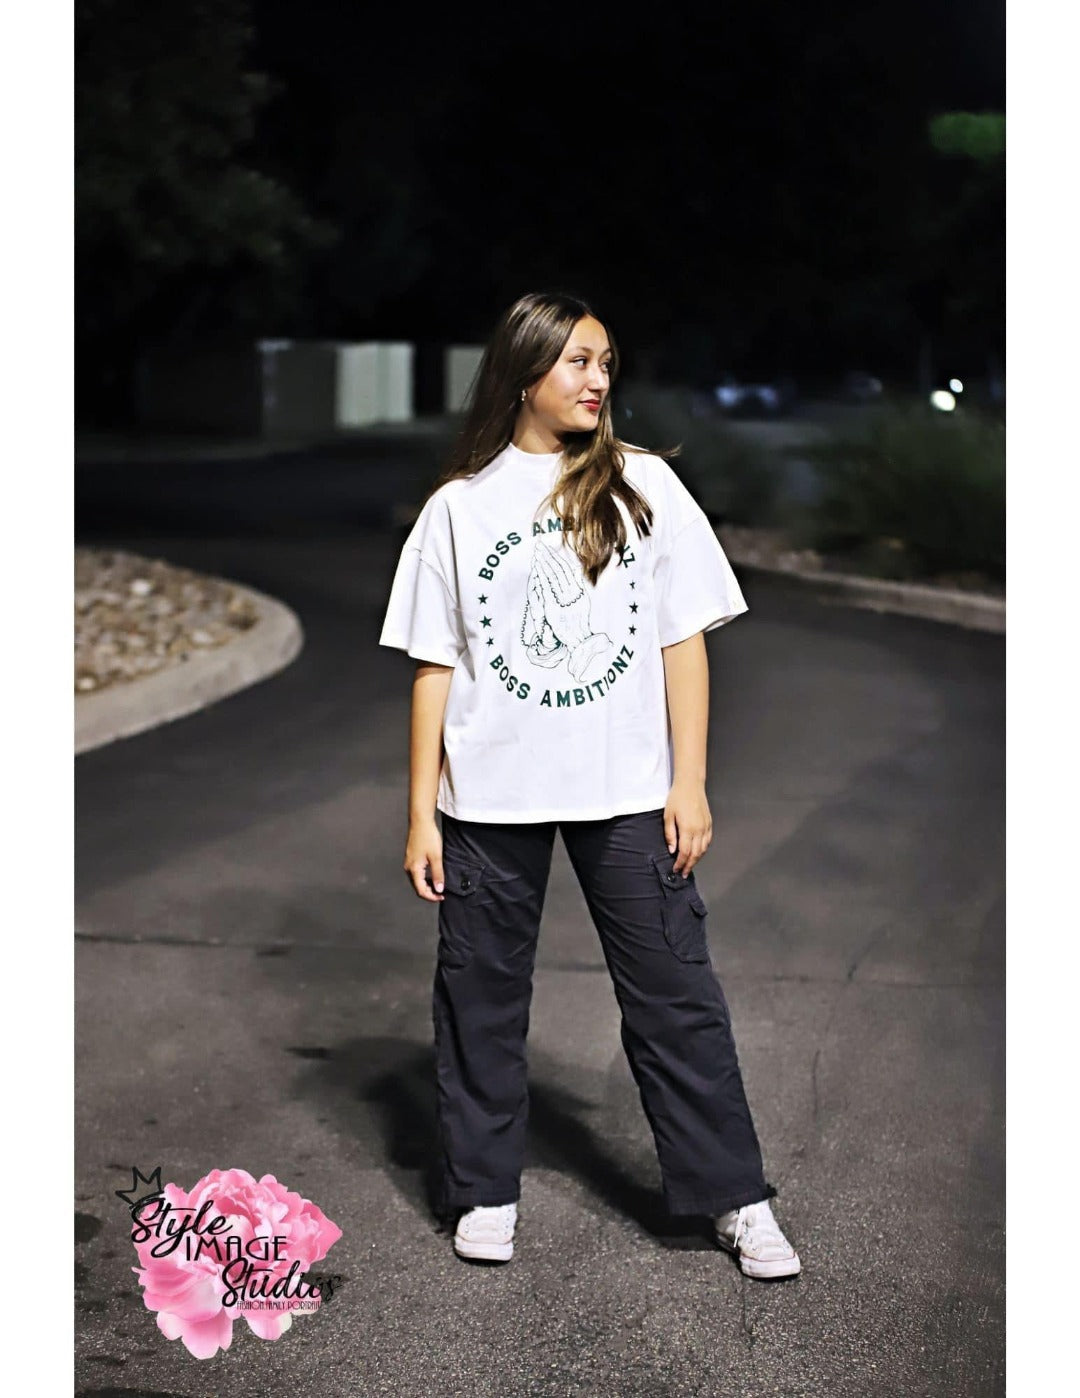 Full-body shot of Miss Junior Teen United USA in a relaxed pose on a dimly lit street, sporting a white Boss Ambitionz t-shirt with bold back print saying 'EVERYDAY ABOVE GROUND IS A GOOD DAY', paired with dark pants.